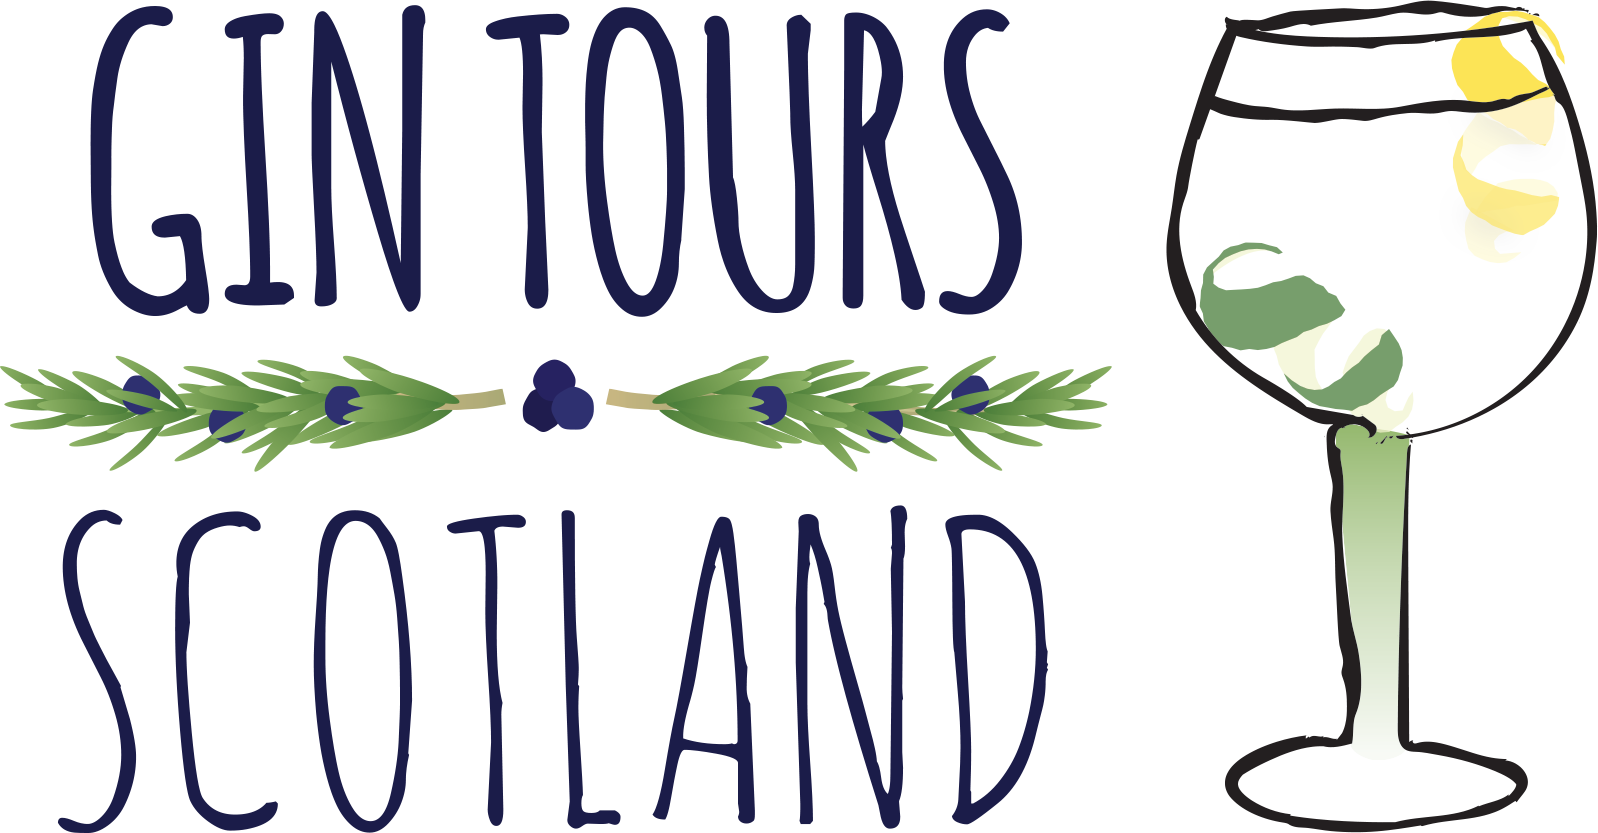 Gin Tours Scotland Logo - Dinosaurs Didn't Read: Now They Are Extinct (1598x833)